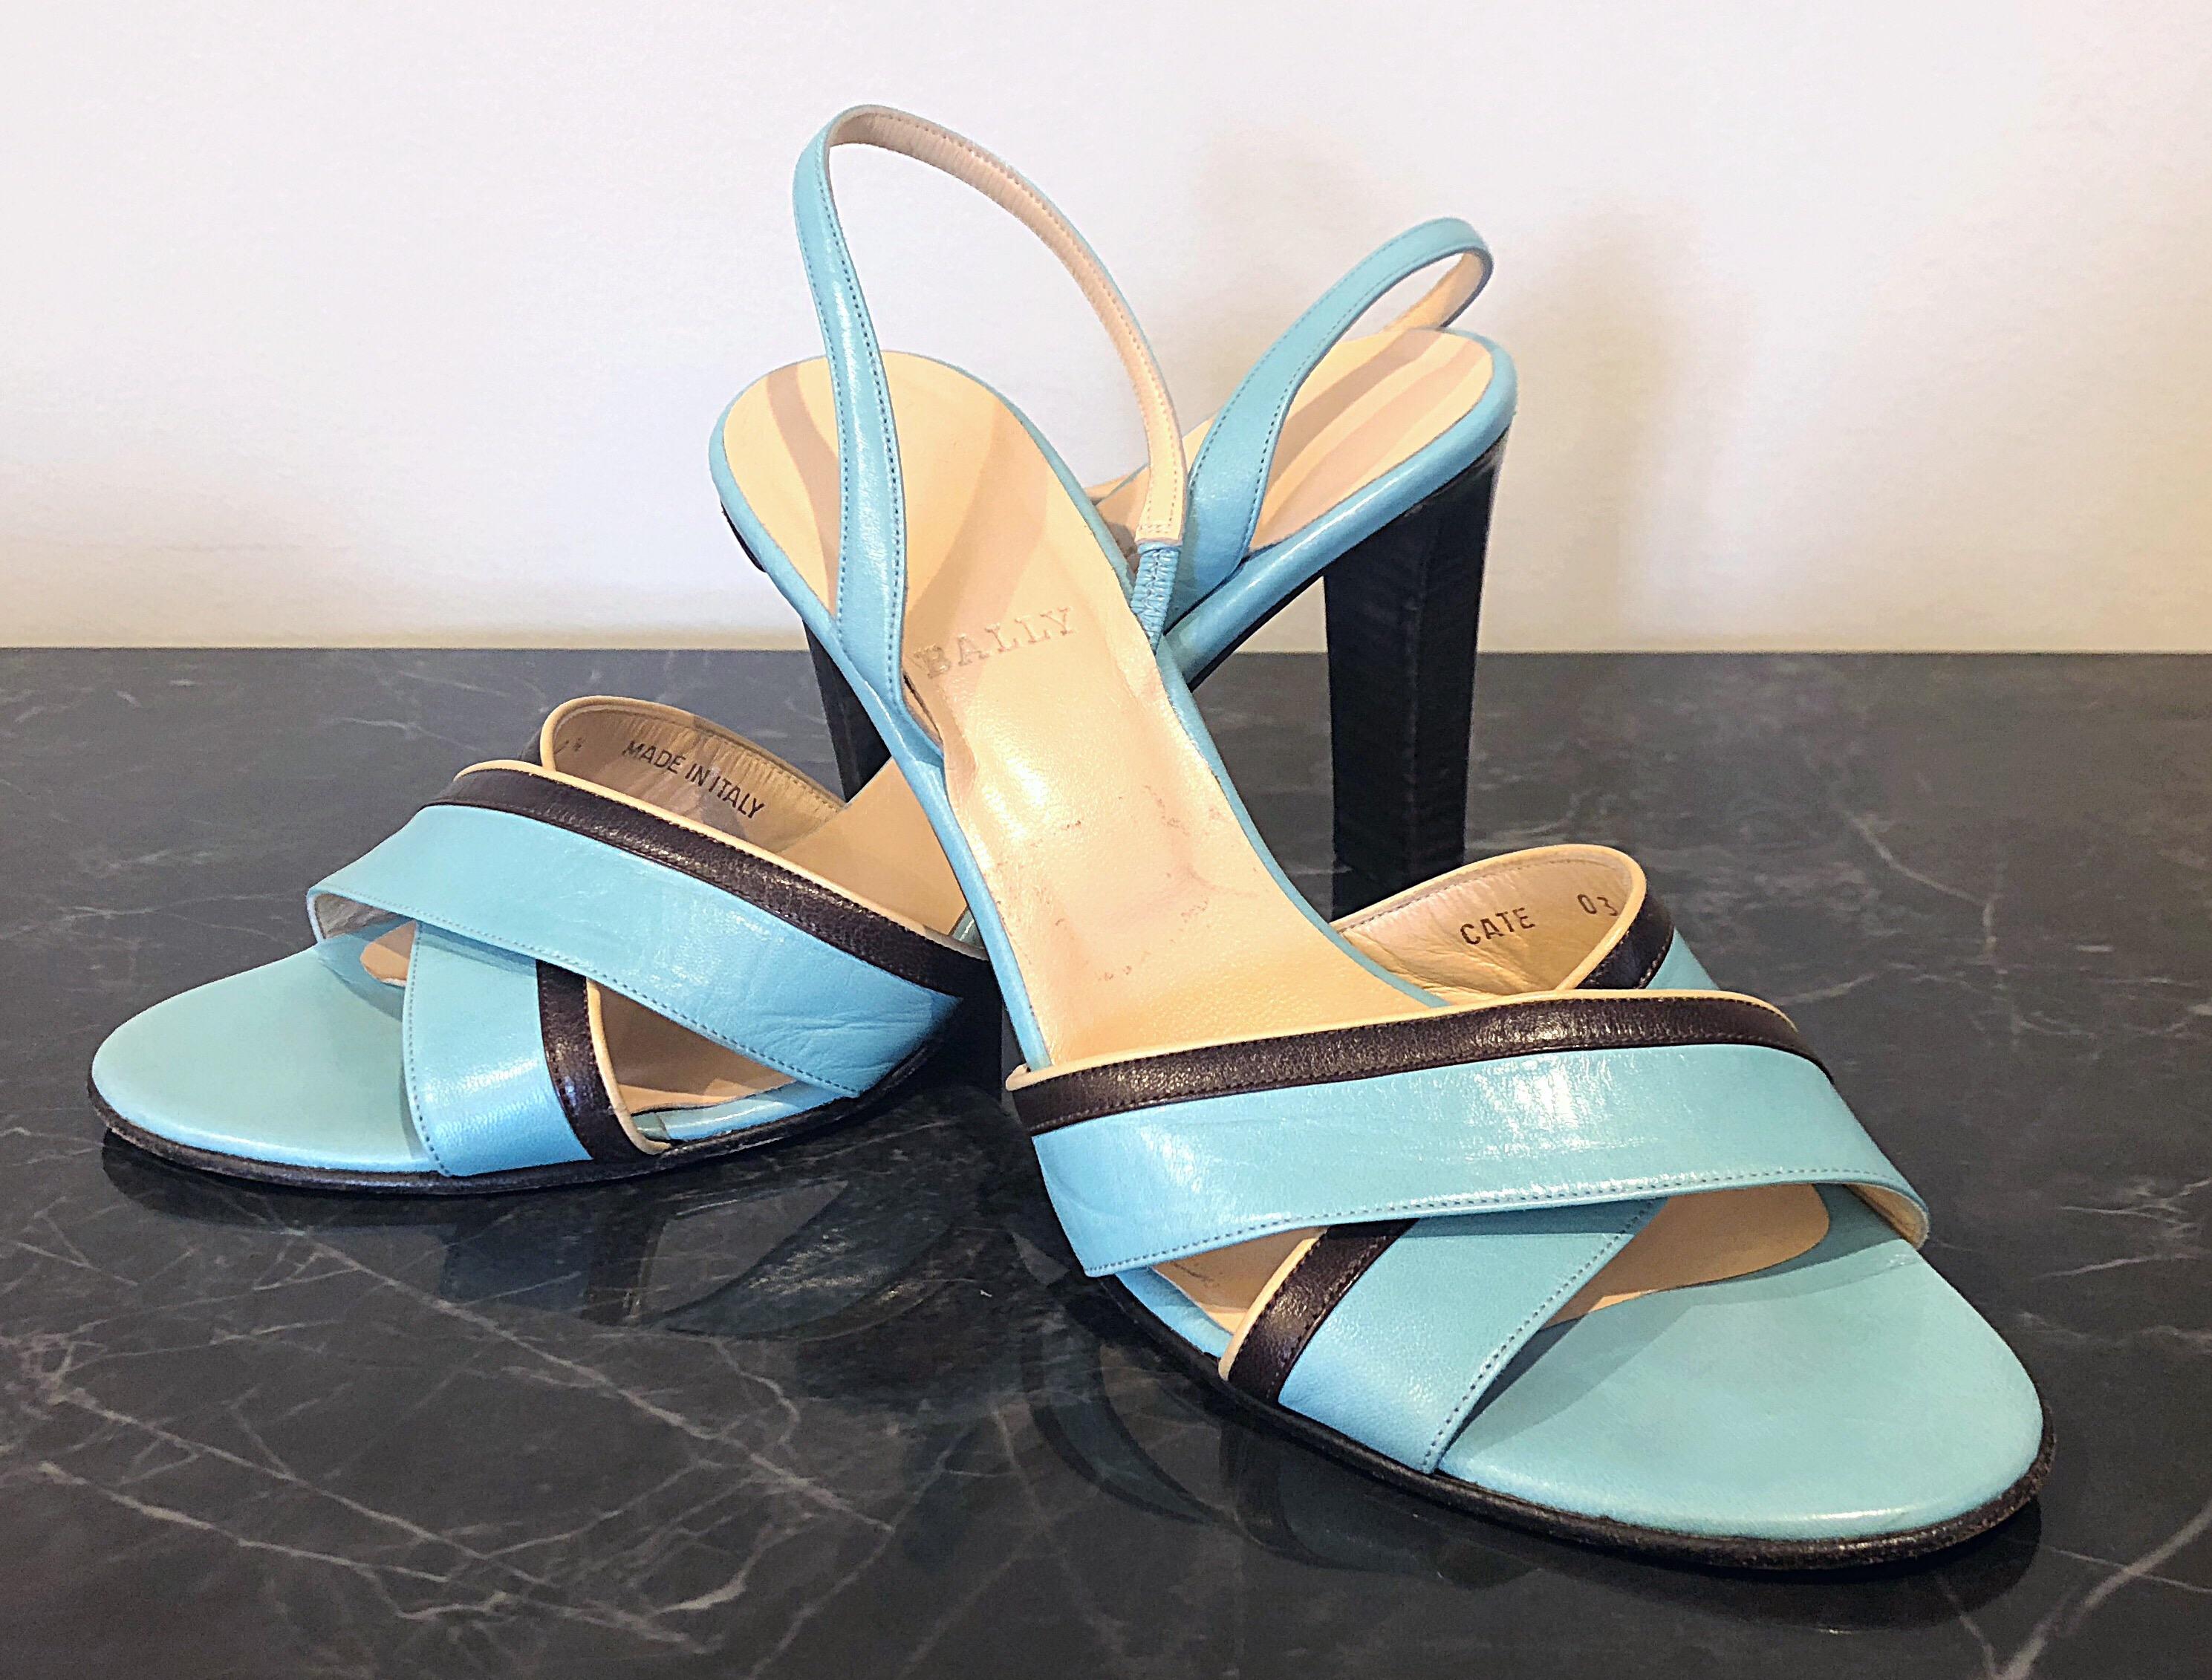 Beautiful vintage late 90s BALLY robins egg blue Size 40.5 / US 10 stacked high heel sandals! Features a vibrant teal / robins egg blue leather. Brown stacked heel makes for great comfort. The perfect pop of color to accent any outfit. Great with